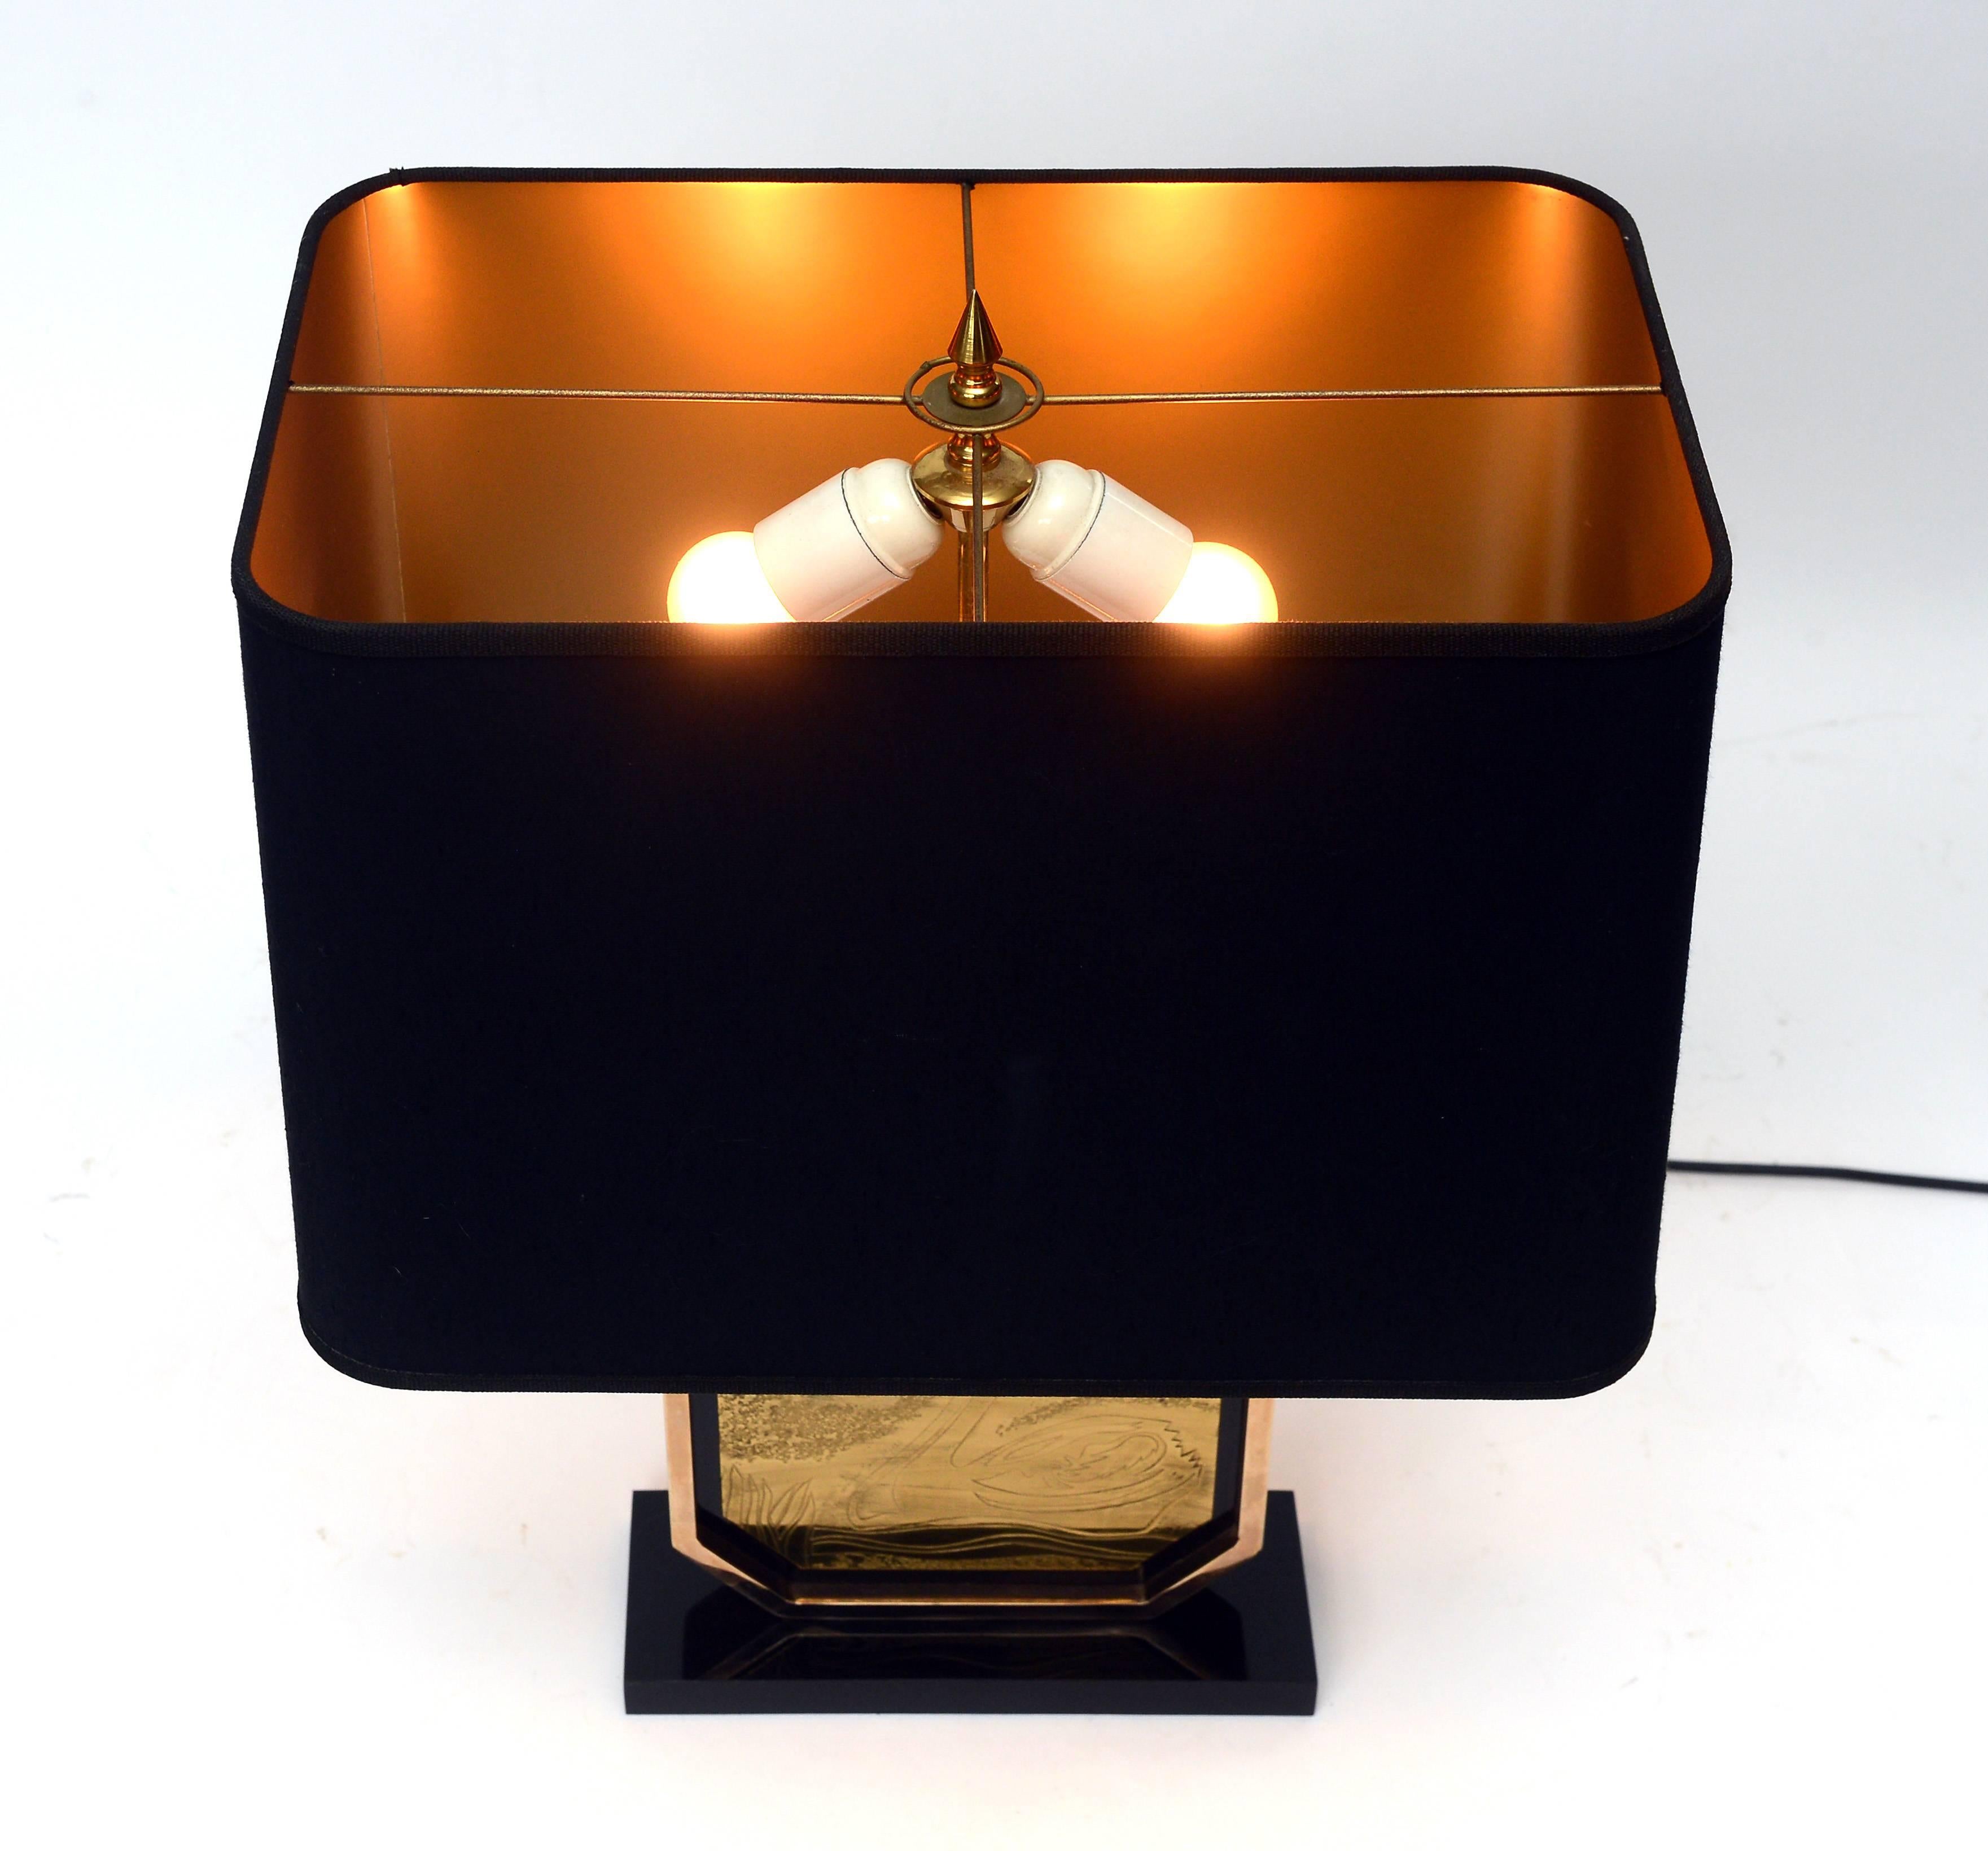 Beautiful Belgian design brass etched table lamp by George Matthias.

The lamp is made from 23-karat gold plating and is in very good condition.

Two lightpoints, to be used with normal E27 Edison bulbs.

The art on the lamp depicts a swan and